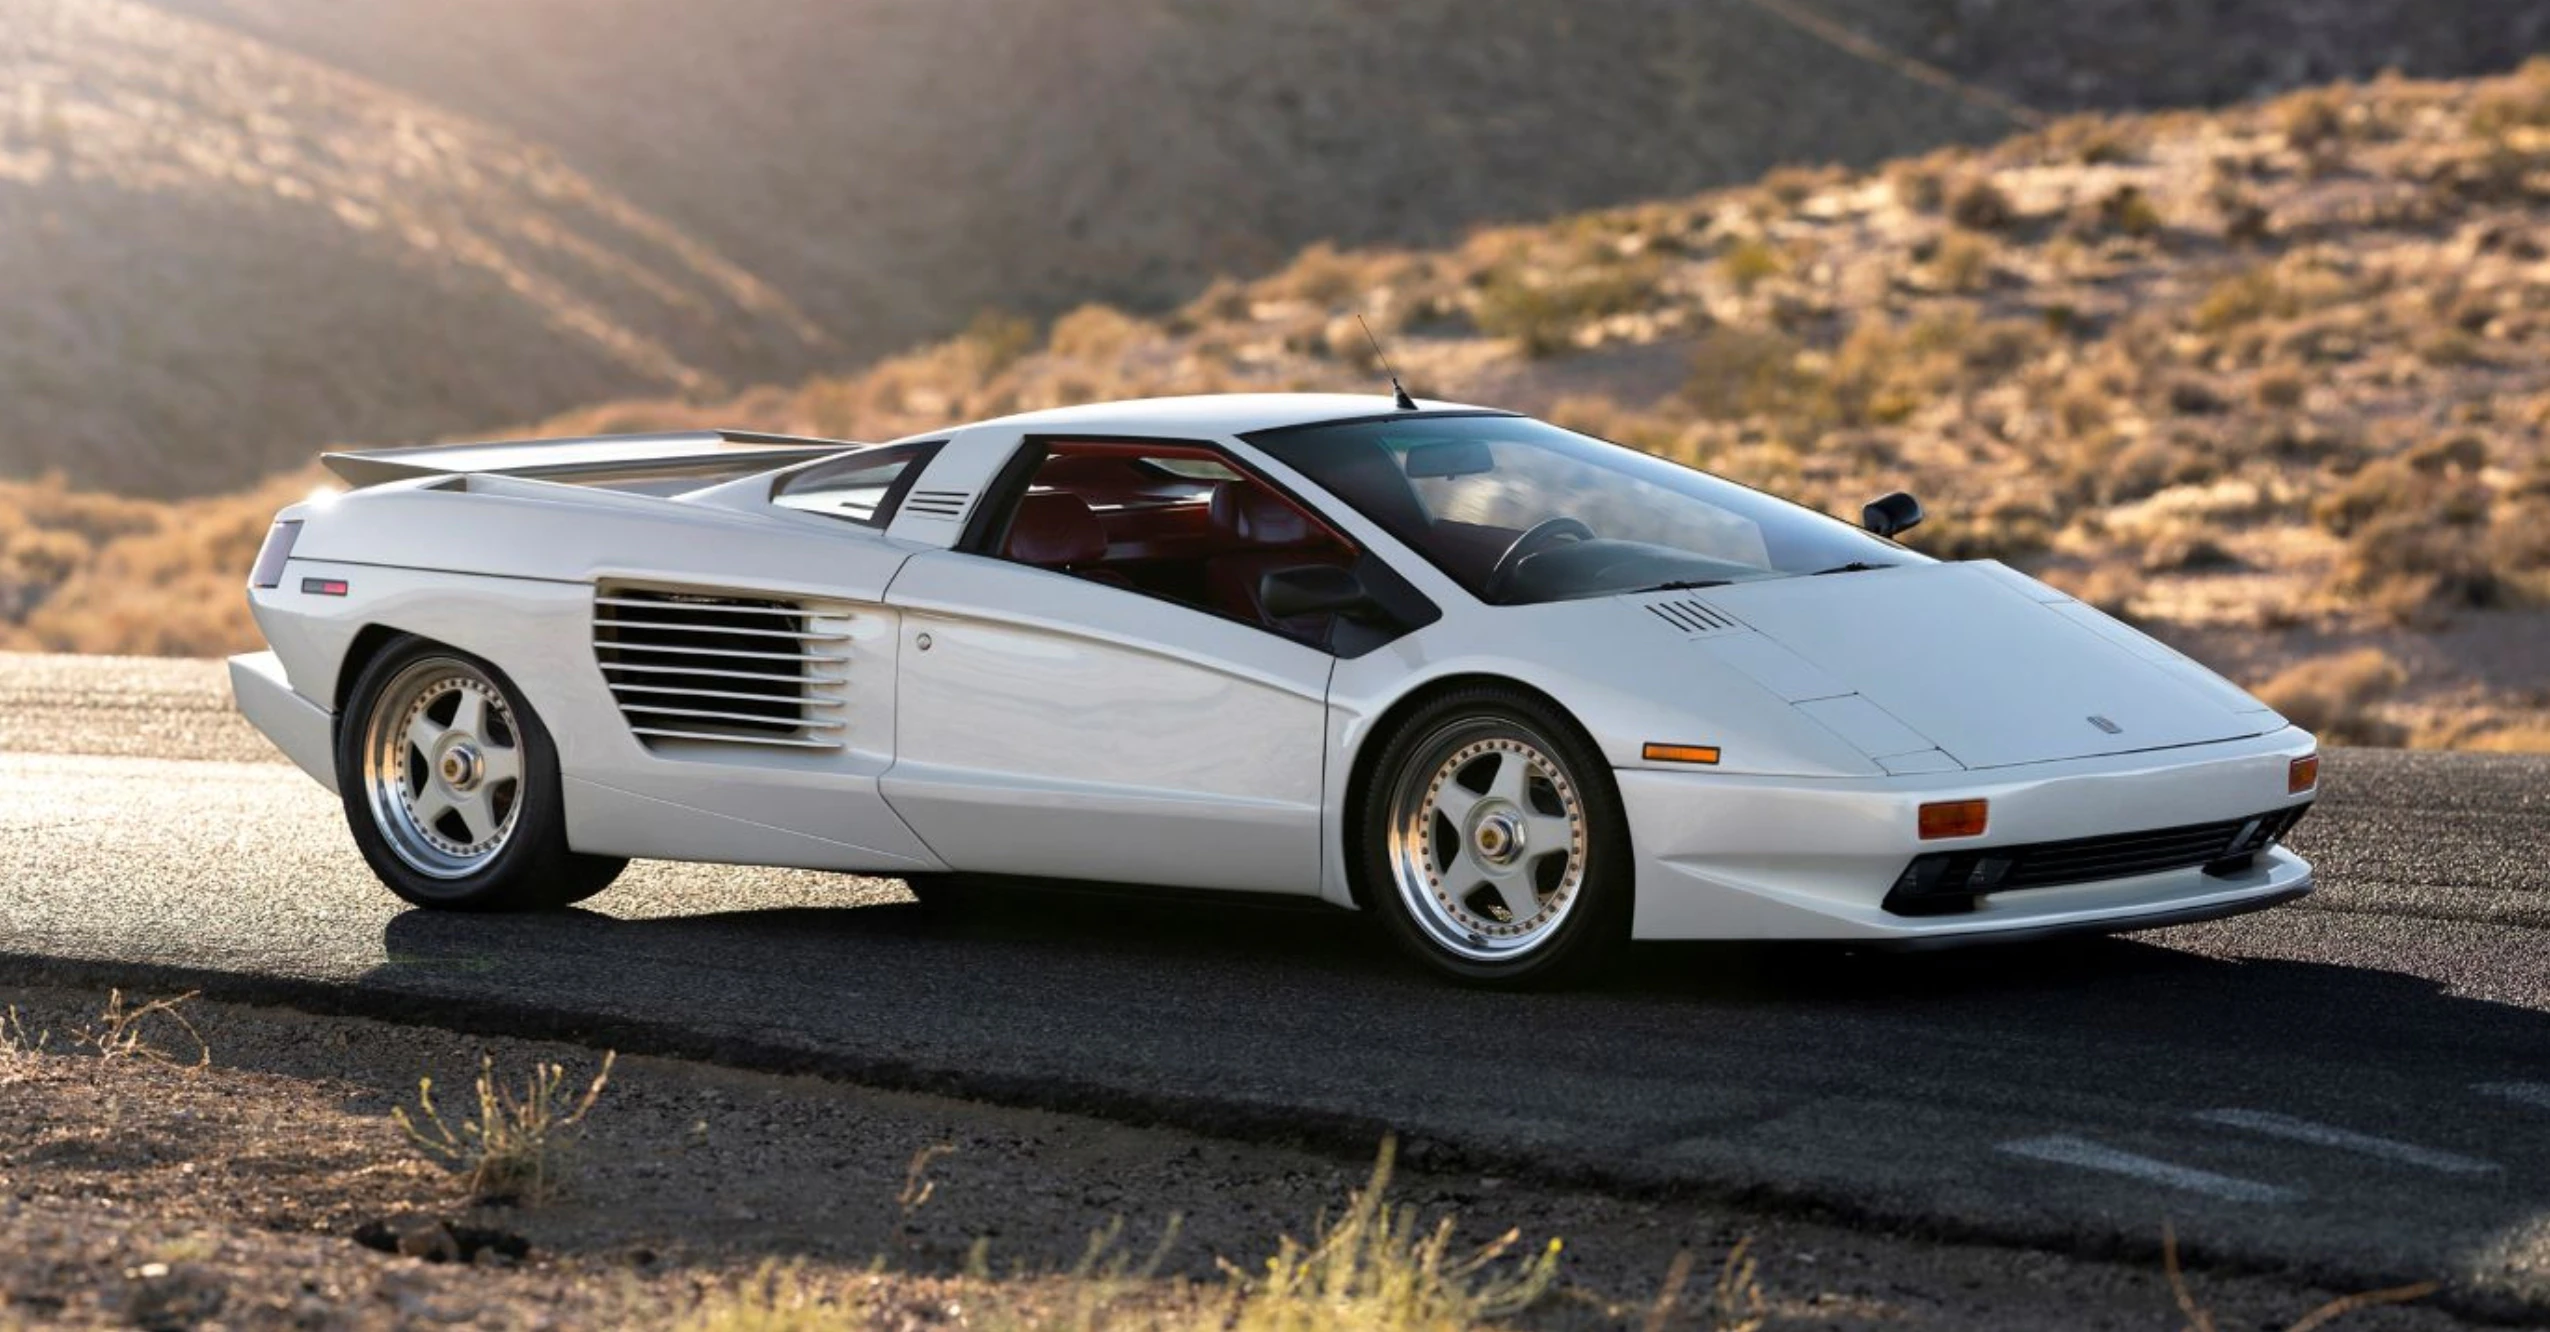 This Classic Supercar Named After EDM and Disco Pioneer Giorgio Moroder Is Headed to Auction